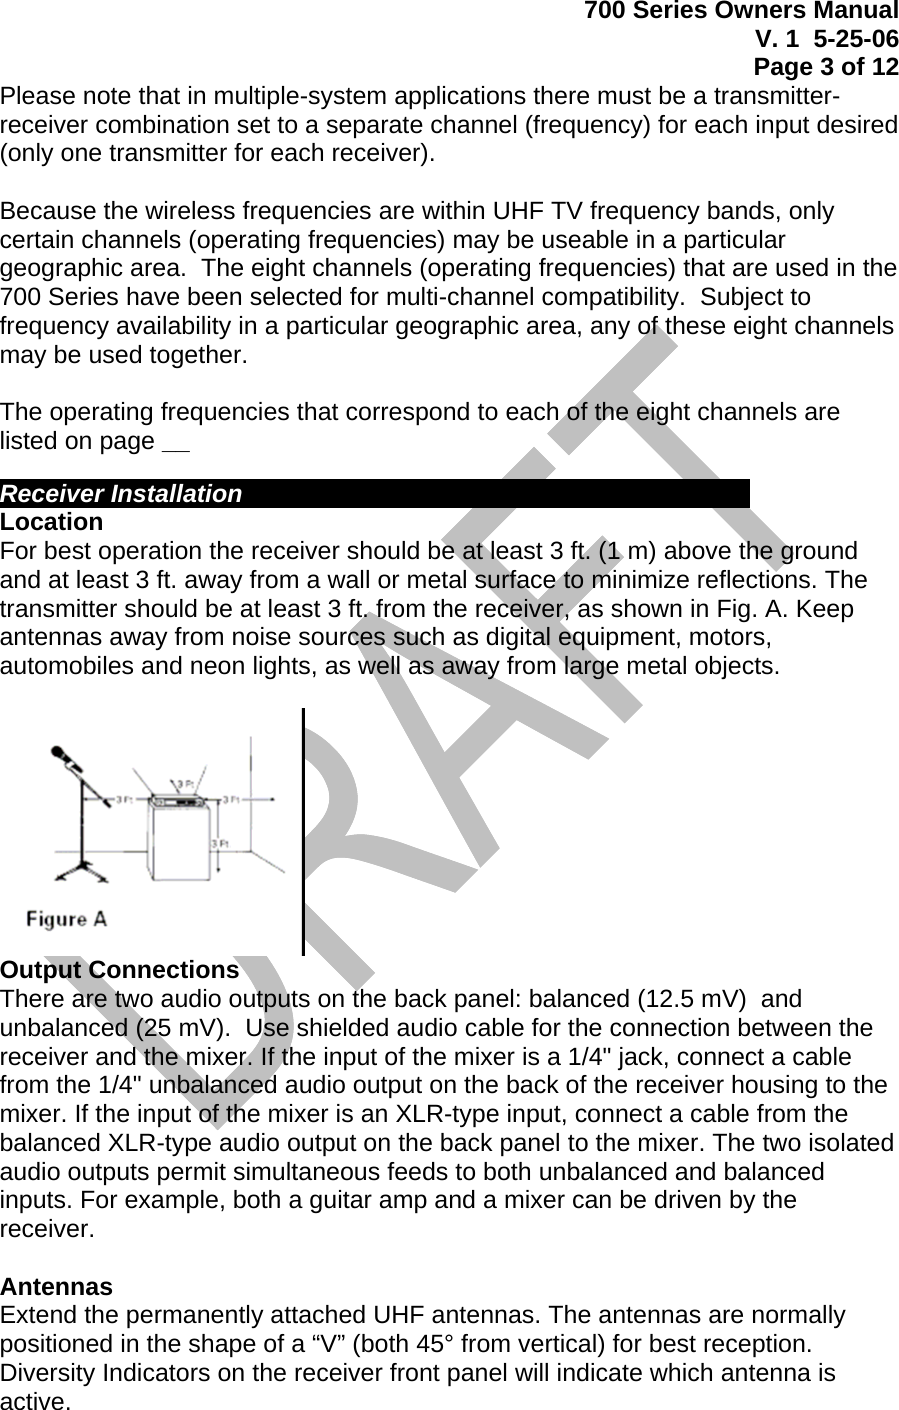 700 Series Owners Manual V. 1  5-25-06 Page 3 of 12  Please note that in multiple-system applications there must be a transmitter-receiver combination set to a separate channel (frequency) for each input desired (only one transmitter for each receiver).  Because the wireless frequencies are within UHF TV frequency bands, only certain channels (operating frequencies) may be useable in a particular geographic area.  The eight channels (operating frequencies) that are used in the 700 Series have been selected for multi-channel compatibility.  Subject to frequency availability in a particular geographic area, any of these eight channels may be used together.    The operating frequencies that correspond to each of the eight channels are listed on page __   Receiver Installation           Location For best operation the receiver should be at least 3 ft. (1 m) above the ground and at least 3 ft. away from a wall or metal surface to minimize reflections. The transmitter should be at least 3 ft. from the receiver, as shown in Fig. A. Keep antennas away from noise sources such as digital equipment, motors, automobiles and neon lights, as well as away from large metal objects.   Output Connections There are two audio outputs on the back panel: balanced (12.5 mV)  and unbalanced (25 mV).  Use shielded audio cable for the connection between the receiver and the mixer. If the input of the mixer is a 1/4&quot; jack, connect a cable from the 1/4&quot; unbalanced audio output on the back of the receiver housing to the mixer. If the input of the mixer is an XLR-type input, connect a cable from the balanced XLR-type audio output on the back panel to the mixer. The two isolated audio outputs permit simultaneous feeds to both unbalanced and balanced inputs. For example, both a guitar amp and a mixer can be driven by the receiver.  Antennas Extend the permanently attached UHF antennas. The antennas are normally positioned in the shape of a “V” (both 45° from vertical) for best reception.  Diversity Indicators on the receiver front panel will indicate which antenna is active. 